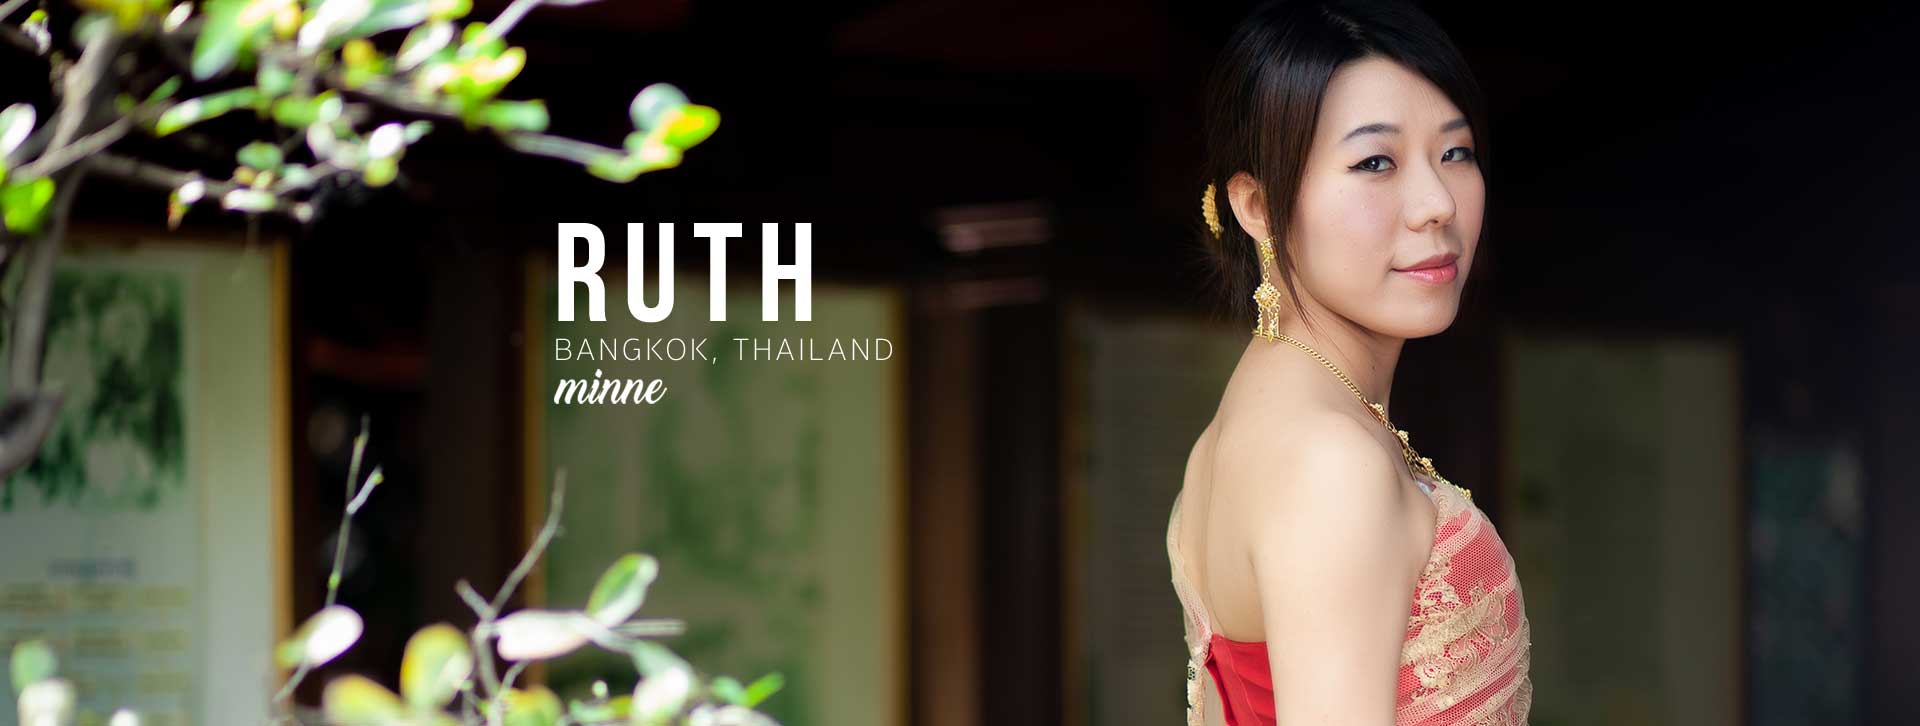 taiwan girl in thai traditional costume long cover